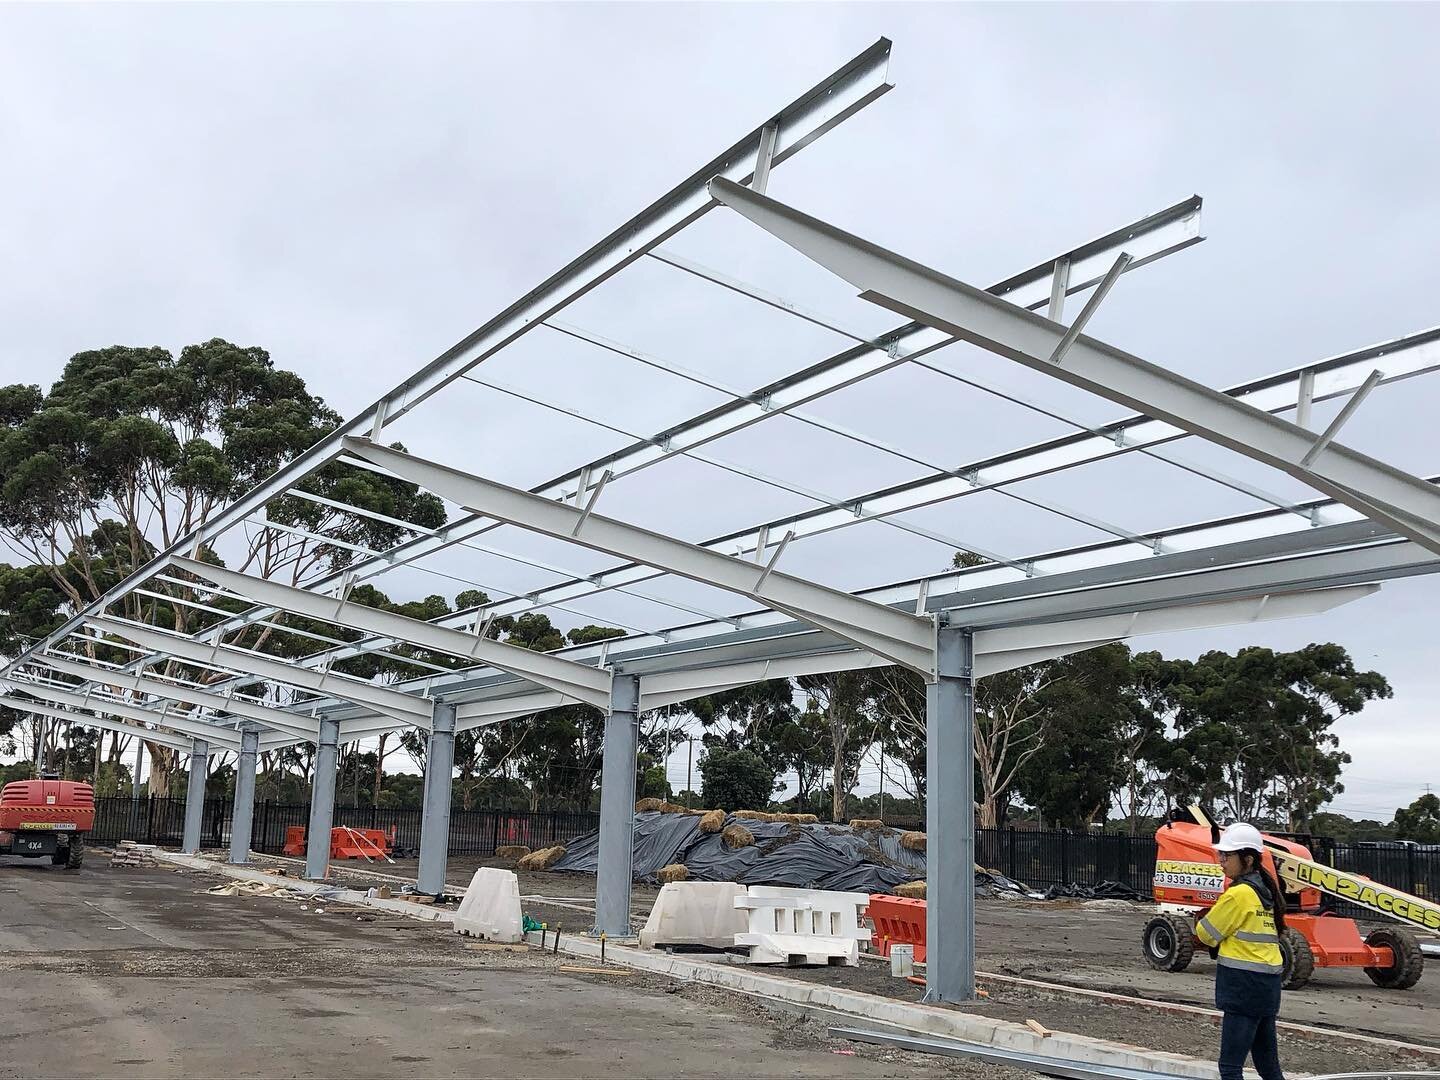 | C U R R E N T - P R O J E C T | We have teamed up again with Autonomous Energy to complete a Cantilever Solar Carpark Structure located at @toyota_aus Centre of Excellence, Altona North, VIC.

#dmccivilandstructural#structural#engineering#steelfram